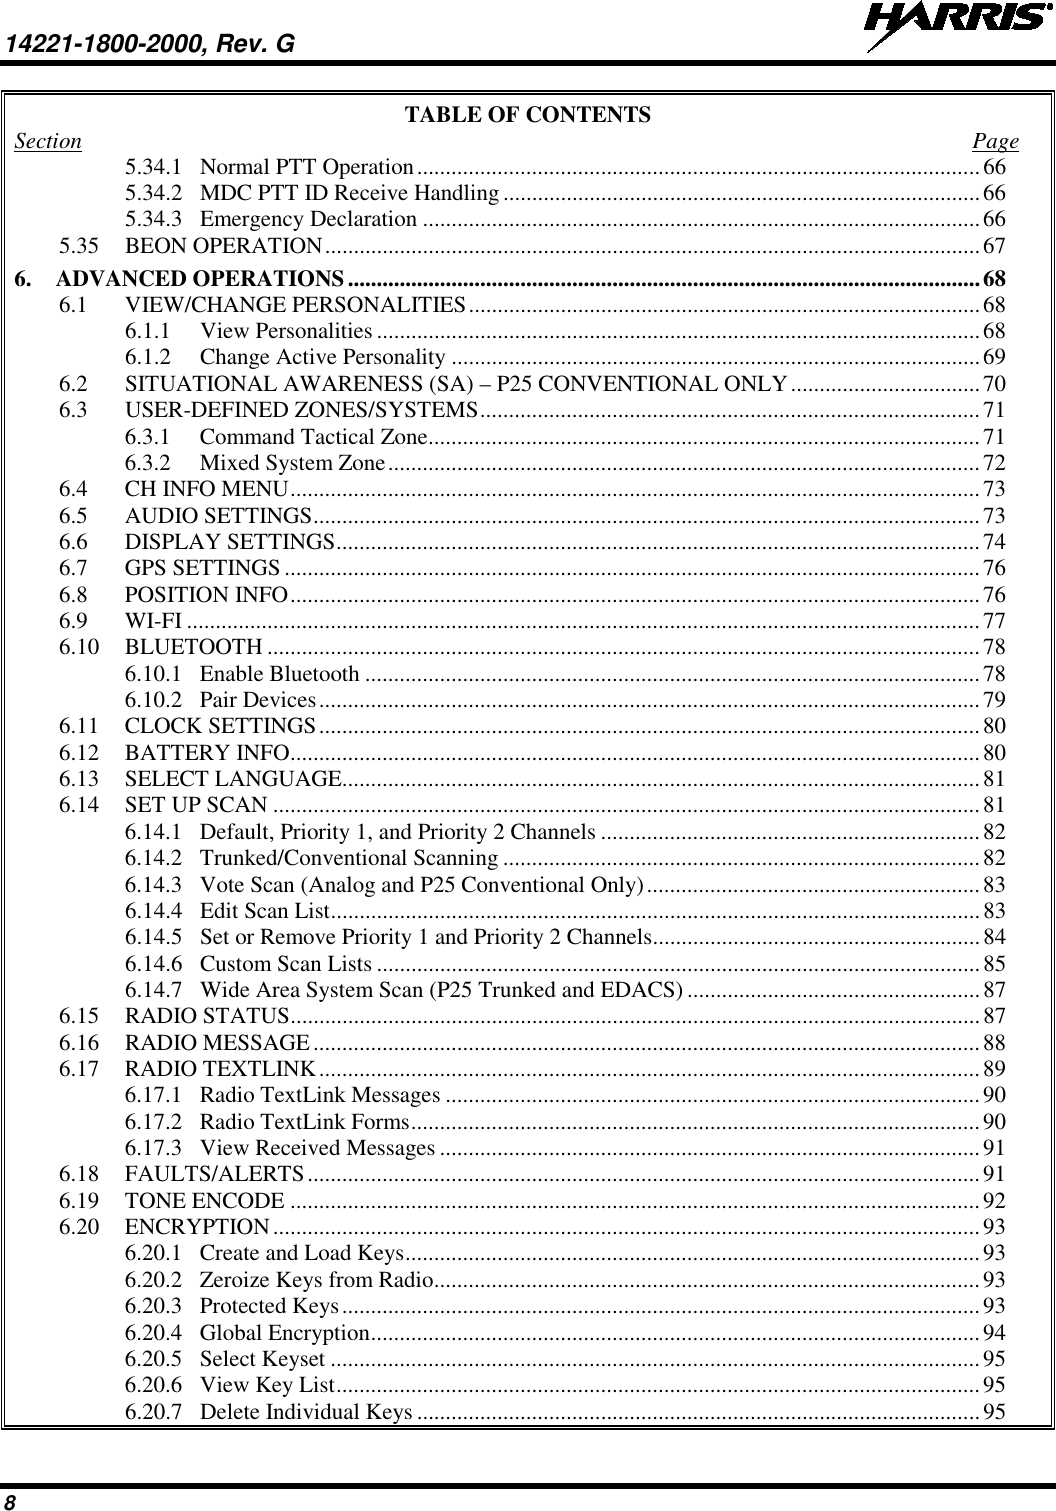 14221-1800-2000, Rev. G   8 TABLE OF CONTENTS Section  Page 5.34.1 Normal PTT Operation .................................................................................................. 66 5.34.2 MDC PTT ID Receive Handling ................................................................................... 66 5.34.3 Emergency Declaration ................................................................................................. 66 5.35 BEON OPERATION .................................................................................................................. 67 6. ADVANCED OPERATIONS .............................................................................................................. 68 6.1 VIEW/CHANGE PERSONALITIES ......................................................................................... 68 6.1.1 View Personalities ......................................................................................................... 68 6.1.2 Change Active Personality ............................................................................................ 69 6.2 SITUATIONAL AWARENESS (SA) – P25 CONVENTIONAL ONLY ................................. 70 6.3 USER-DEFINED ZONES/SYSTEMS ....................................................................................... 71 6.3.1 Command Tactical Zone ................................................................................................ 71 6.3.2 Mixed System Zone ....................................................................................................... 72 6.4 CH INFO MENU ........................................................................................................................ 73 6.5 AUDIO SETTINGS .................................................................................................................... 73 6.6 DISPLAY SETTINGS ................................................................................................................ 74 6.7 GPS SETTINGS ......................................................................................................................... 76 6.8 POSITION INFO ........................................................................................................................ 76 6.9 WI-FI .......................................................................................................................................... 77 6.10 BLUETOOTH ............................................................................................................................ 78 6.10.1 Enable Bluetooth ........................................................................................................... 78 6.10.2 Pair Devices ................................................................................................................... 79 6.11 CLOCK SETTINGS ................................................................................................................... 80 6.12 BATTERY INFO ........................................................................................................................ 80 6.13 SELECT LANGUAGE............................................................................................................... 81 6.14 SET UP SCAN ........................................................................................................................... 81 6.14.1 Default, Priority 1, and Priority 2 Channels .................................................................. 82 6.14.2 Trunked/Conventional Scanning ................................................................................... 82 6.14.3 Vote Scan (Analog and P25 Conventional Only) .......................................................... 83 6.14.4 Edit Scan List ................................................................................................................. 83 6.14.5 Set or Remove Priority 1 and Priority 2 Channels ......................................................... 84 6.14.6 Custom Scan Lists ......................................................................................................... 85 6.14.7 Wide Area System Scan (P25 Trunked and EDACS) ................................................... 87 6.15 RADIO STATUS ........................................................................................................................ 87 6.16 RADIO MESSAGE .................................................................................................................... 88 6.17 RADIO TEXTLINK ................................................................................................................... 89 6.17.1 Radio TextLink Messages ............................................................................................. 90 6.17.2 Radio TextLink Forms ................................................................................................... 90 6.17.3 View Received Messages .............................................................................................. 91 6.18 FAULTS/ALERTS ..................................................................................................................... 91 6.19 TONE ENCODE ........................................................................................................................ 92 6.20 ENCRYPTION ........................................................................................................................... 93 6.20.1 Create and Load Keys .................................................................................................... 93 6.20.2 Zeroize Keys from Radio ............................................................................................... 93 6.20.3 Protected Keys ............................................................................................................... 93 6.20.4 Global Encryption .......................................................................................................... 94 6.20.5 Select Keyset ................................................................................................................. 95 6.20.6 View Key List ................................................................................................................ 95 6.20.7 Delete Individual Keys .................................................................................................. 95 